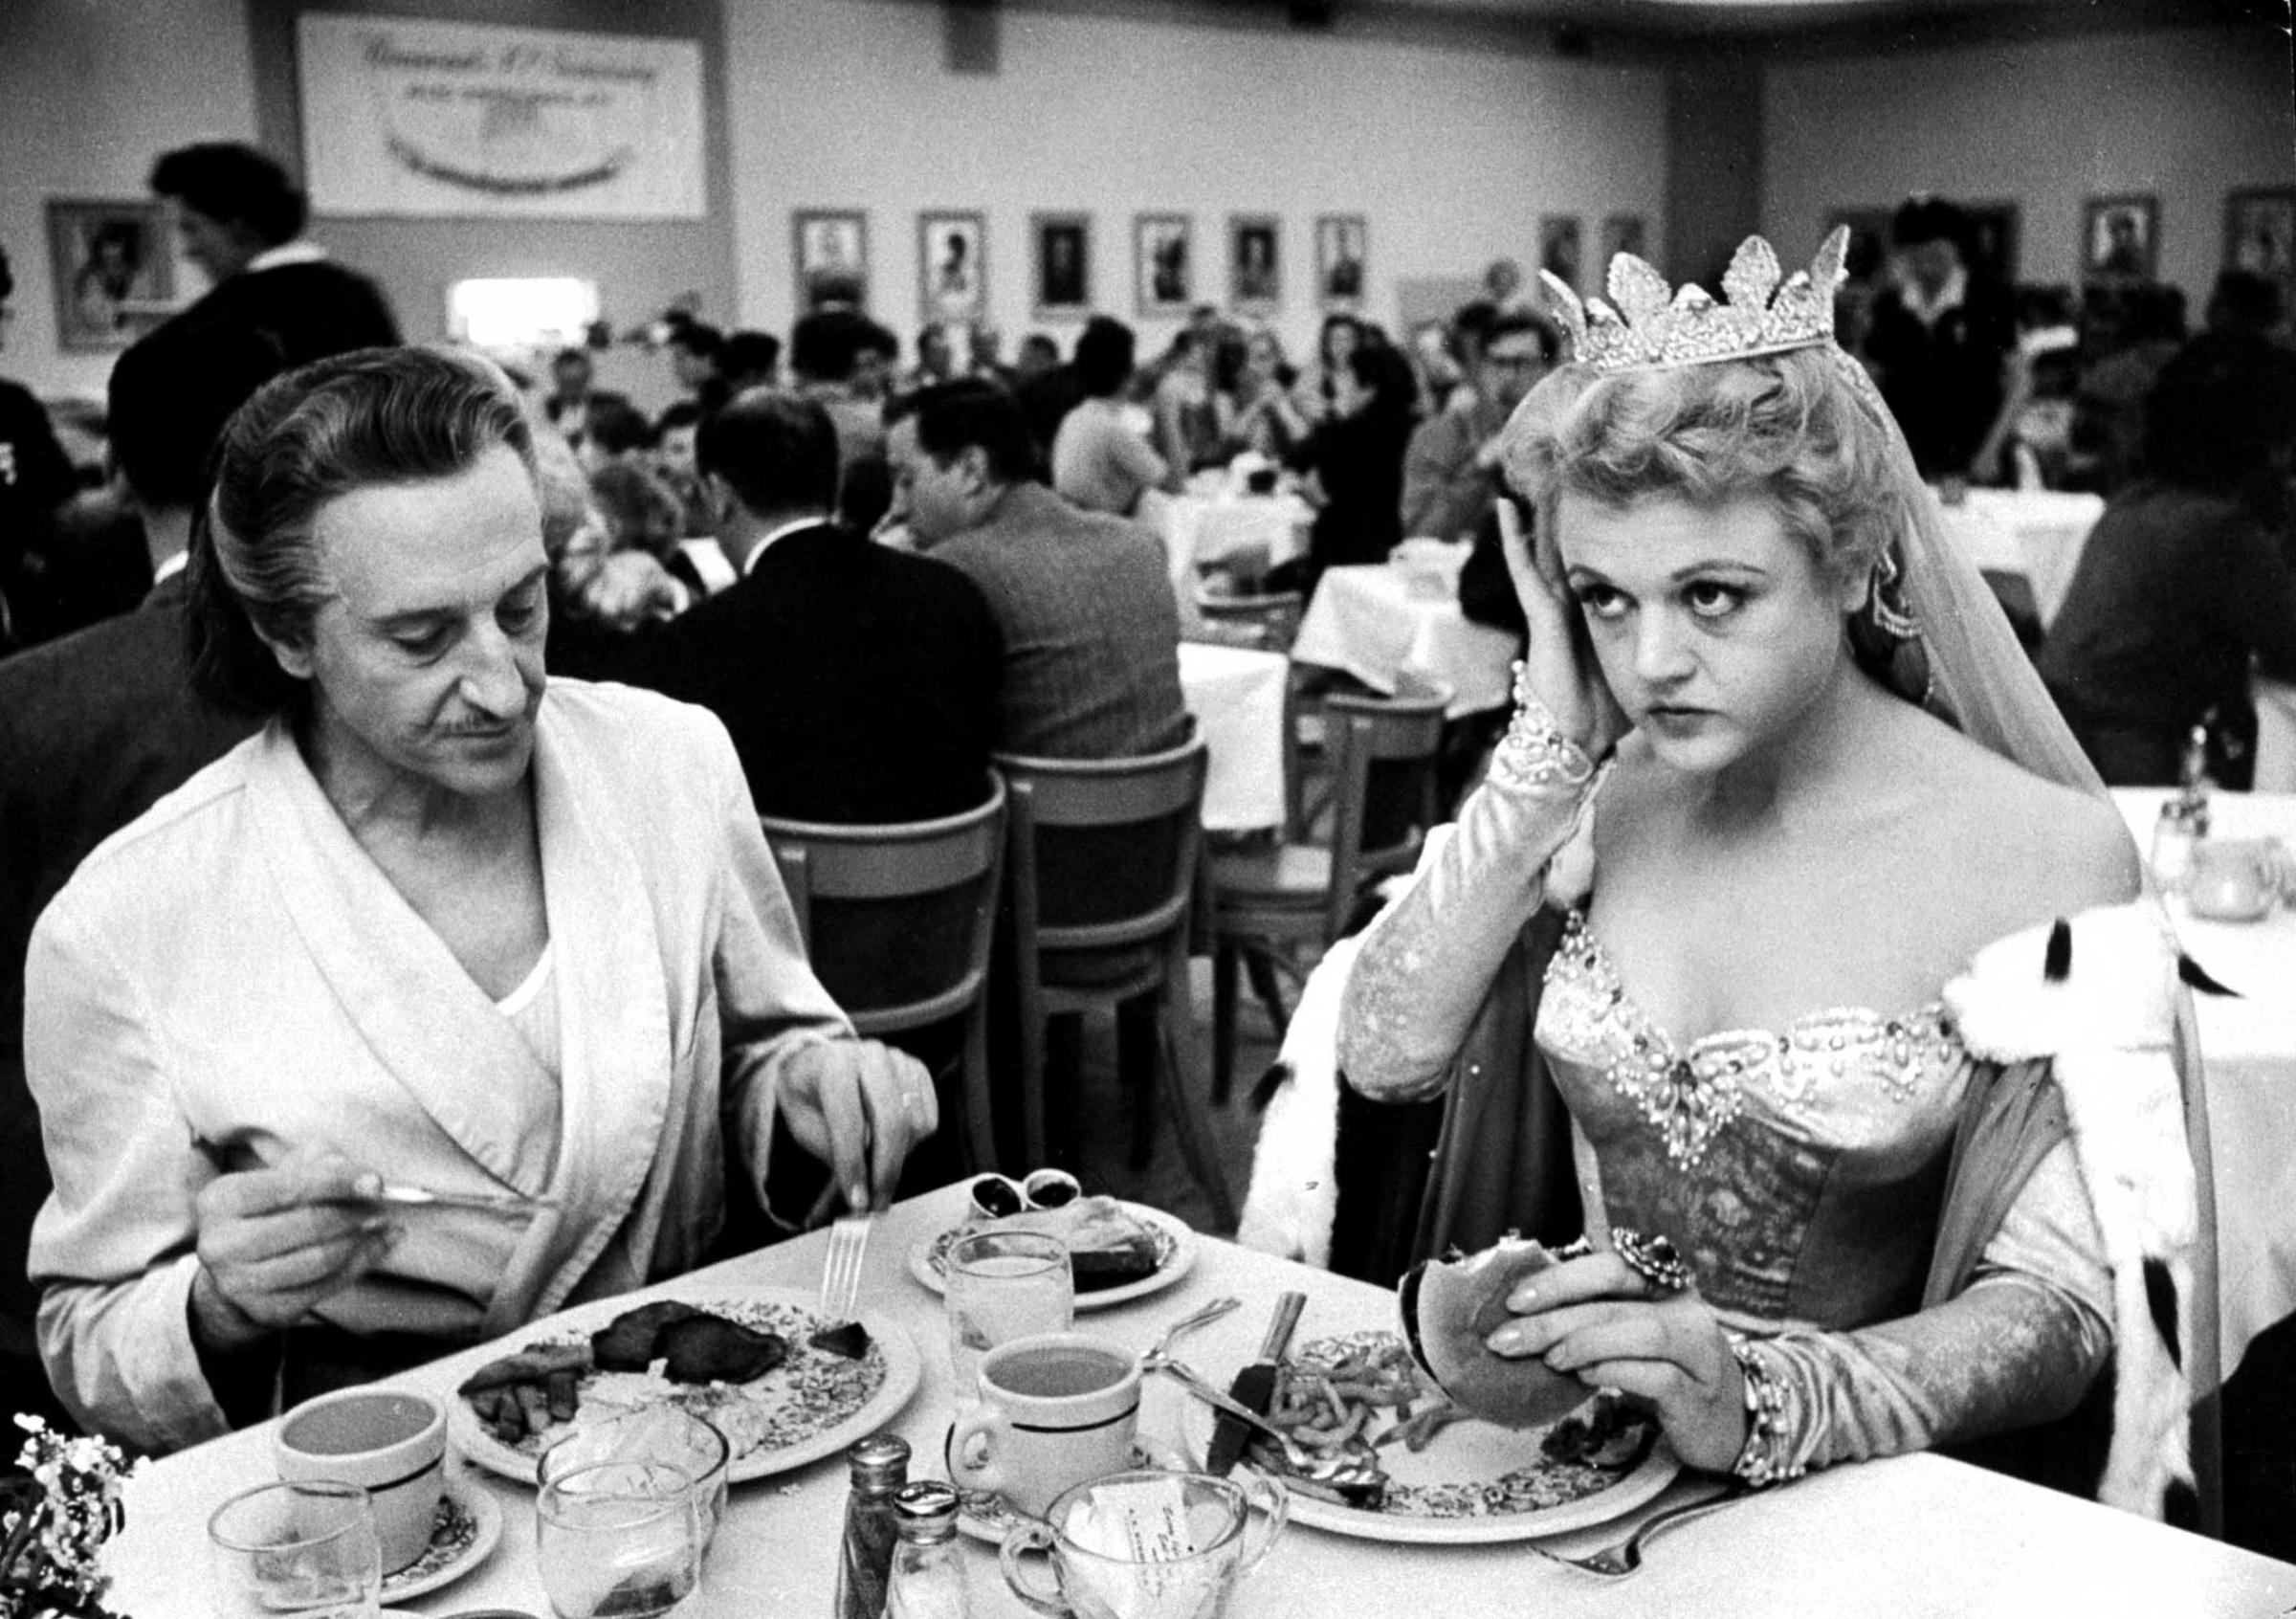 Angela Lansbury, in costume for her role in The Court Jester, eats lunch with Basil Rathbone in the Paramount Studio commissary, December 1954.